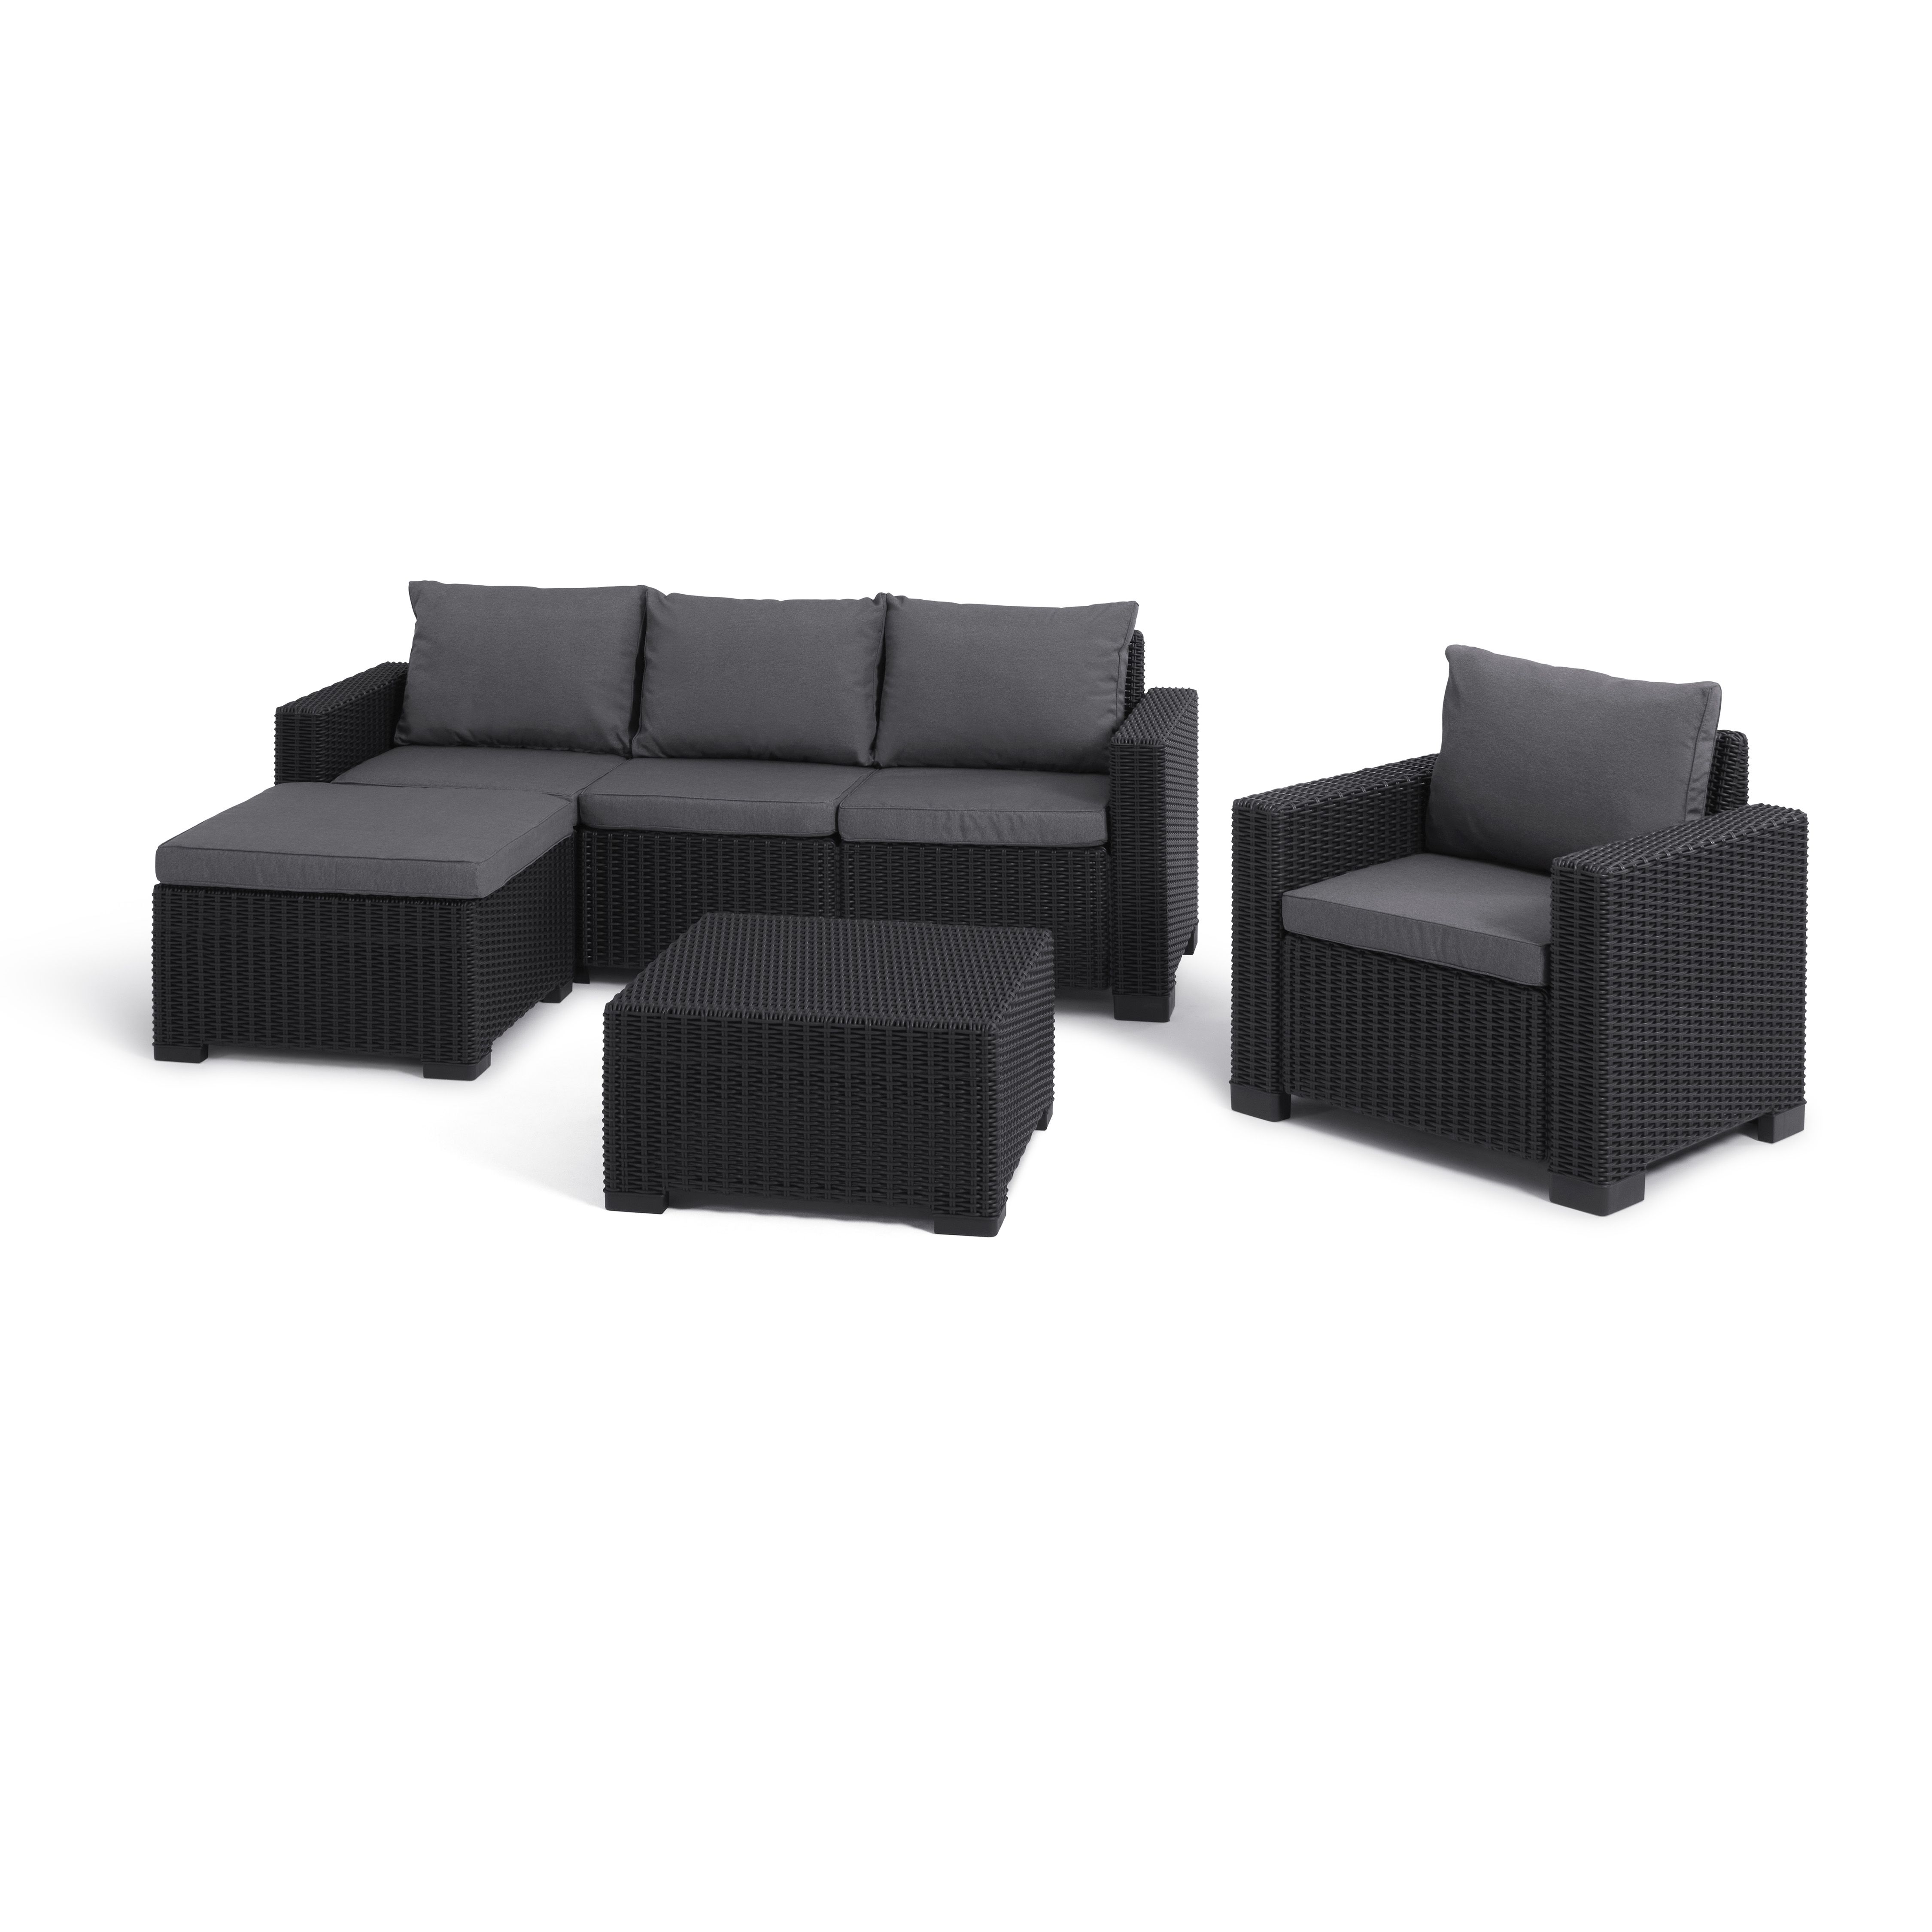 Keter California Graphite 4 Seater Garden furniture set with Coffee table & Footstool